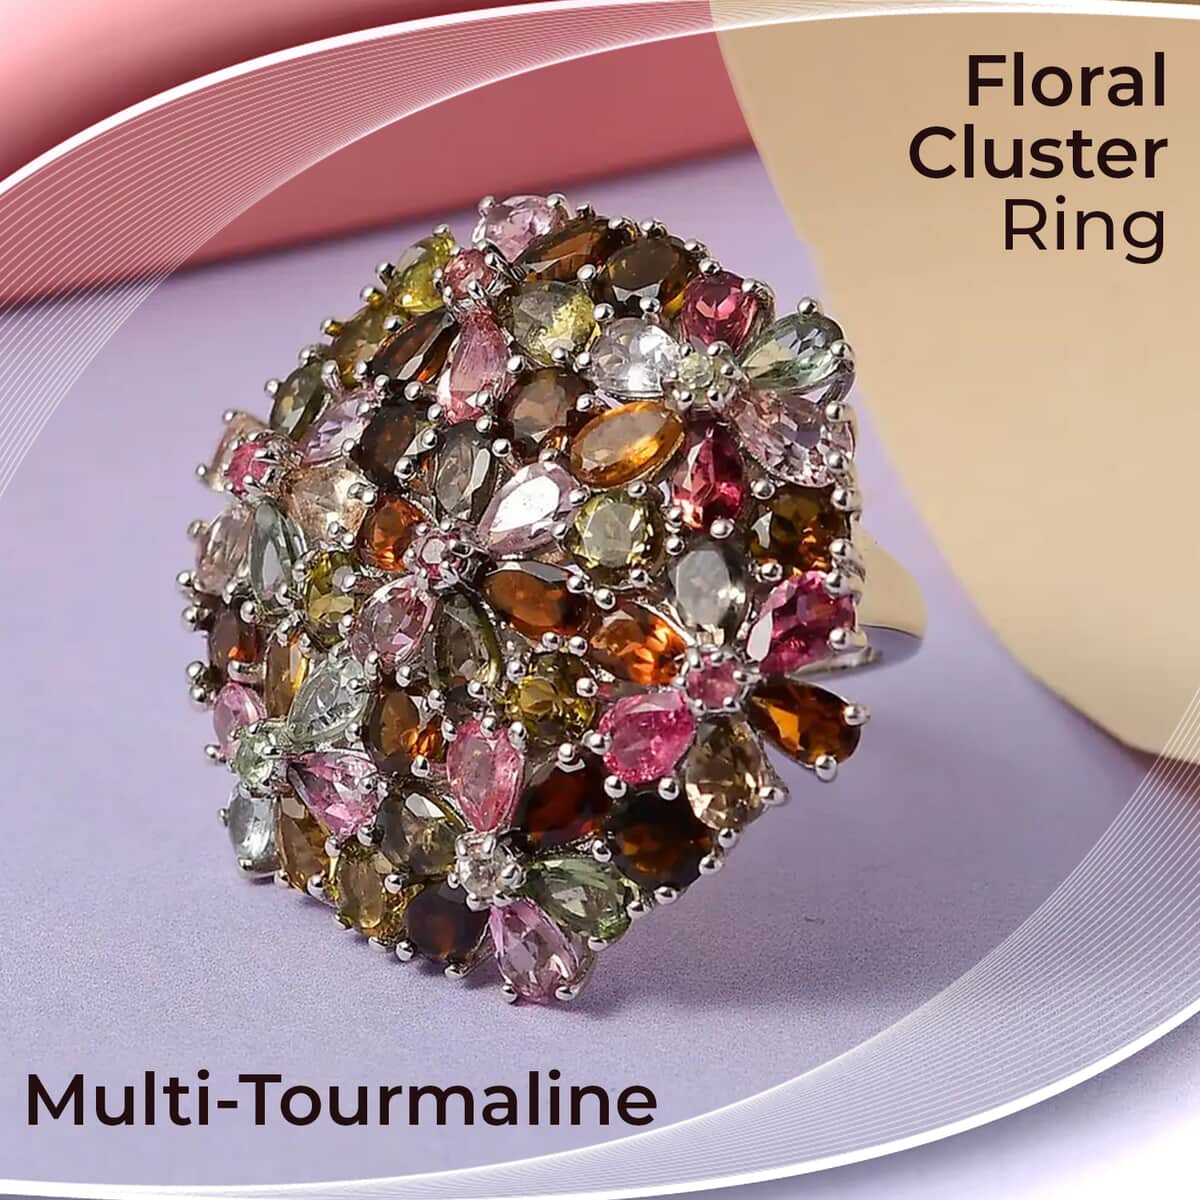 Multi-Tourmaline Floral Ring, Multi Tourmaline Ring, Floral Cluster Ring, Platinum Over Sterling Silver Ring 11.90 ctw (Size 6) image number 1